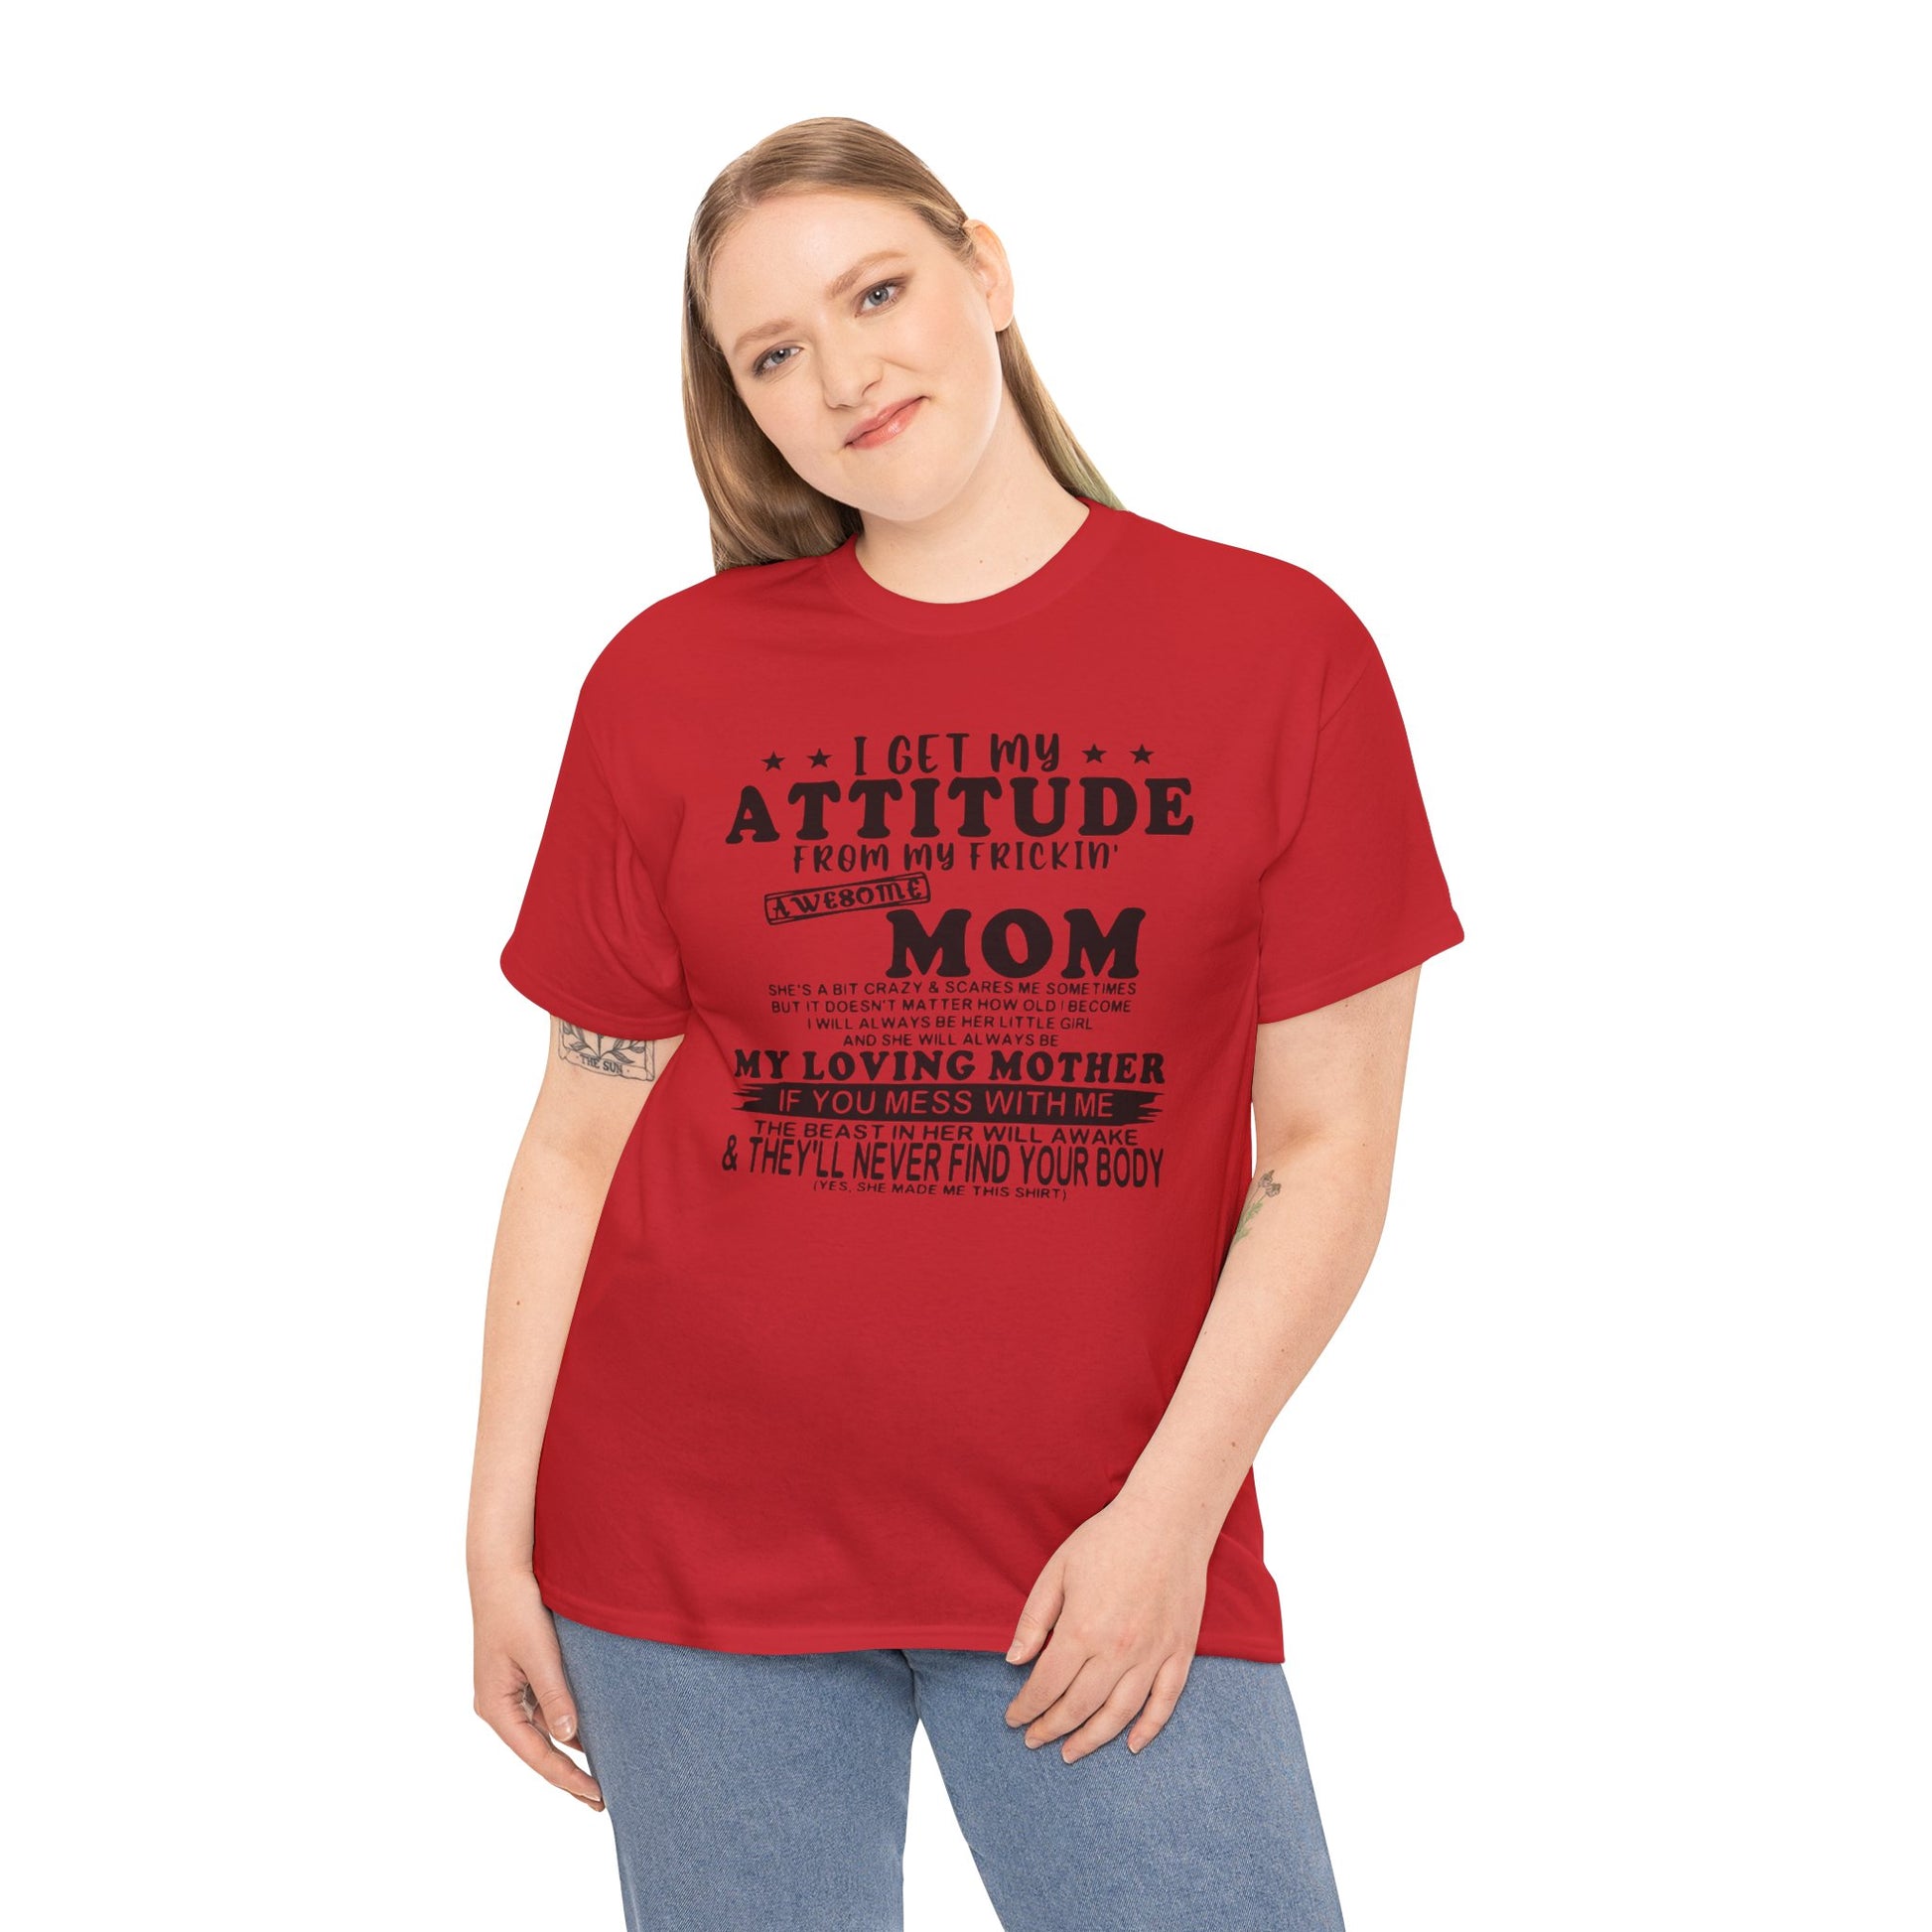  "My Frickin Awesome Mom" T-Shirt: Celebrate Moms with Humor